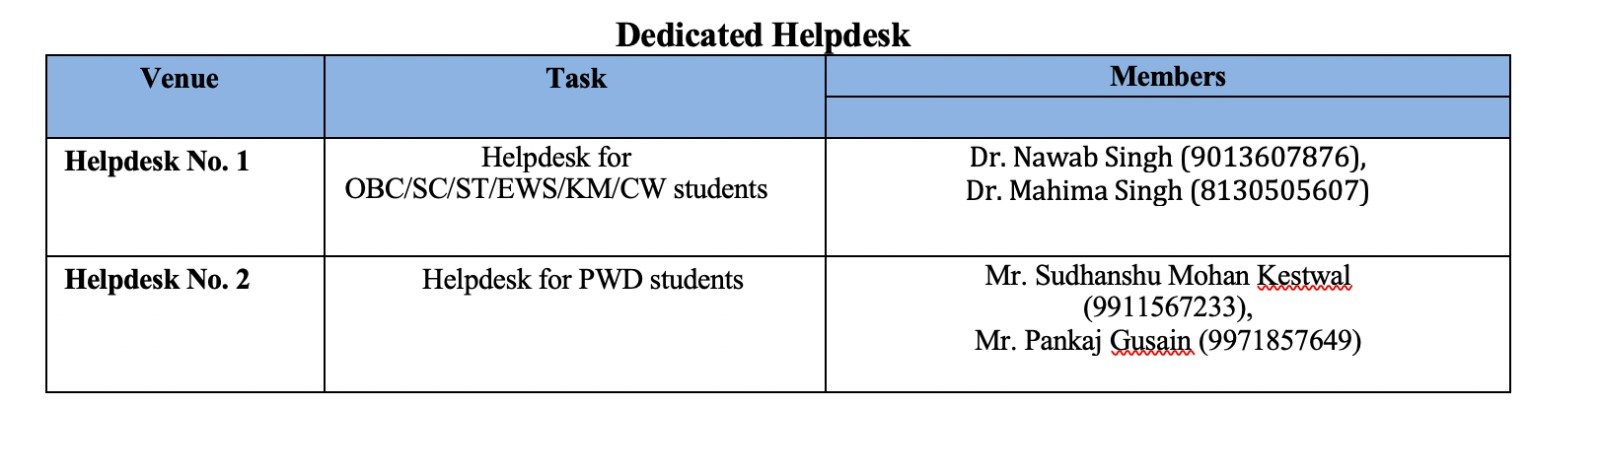 Helpdesk for OBC/SC/ST/KM/CW/PWBD students